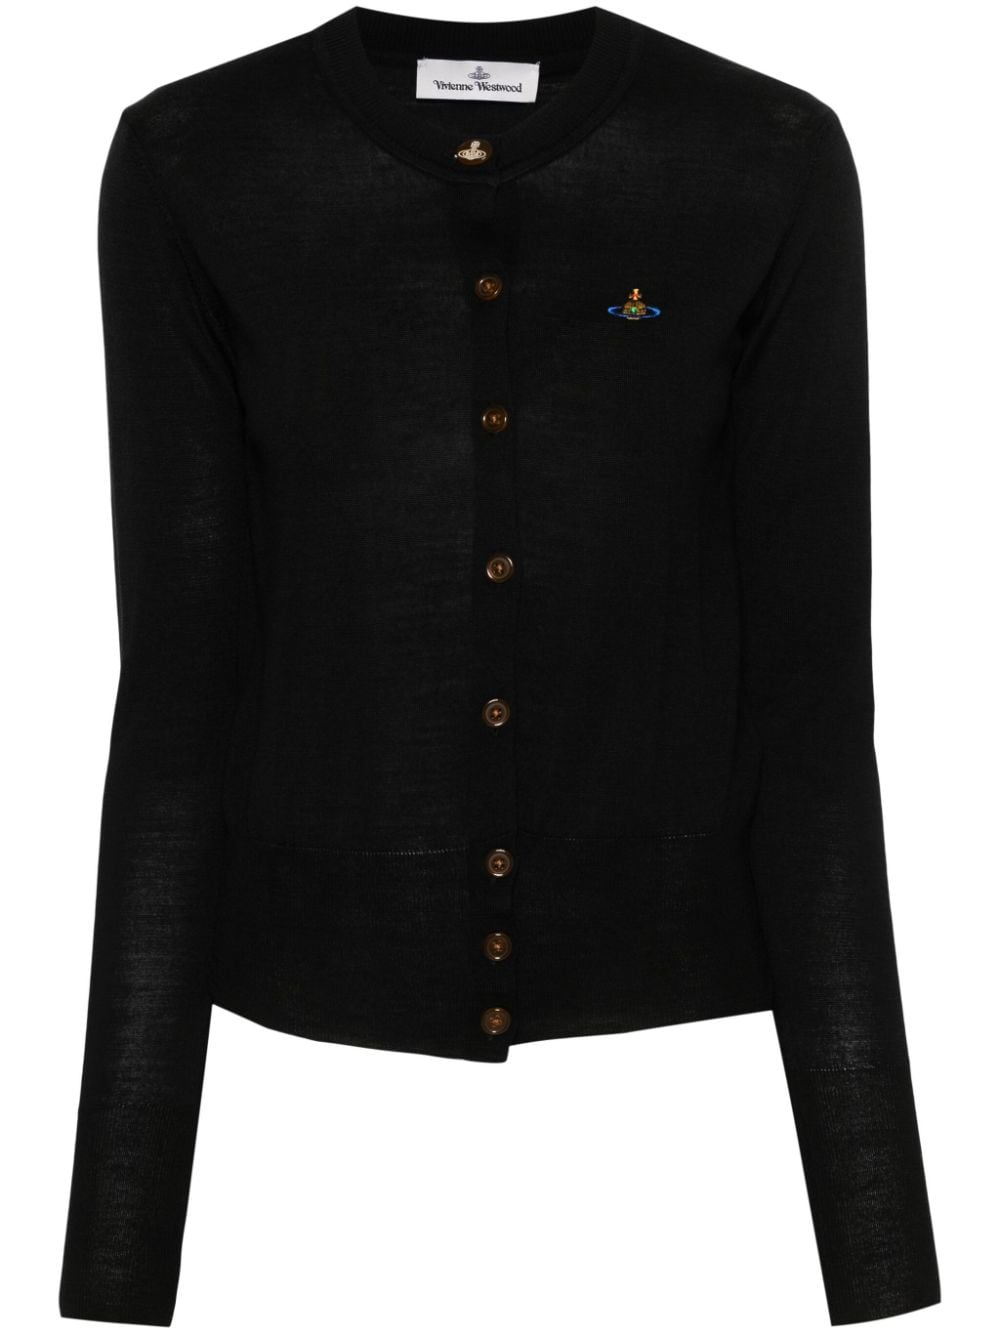 Orb-embroidered cardigan